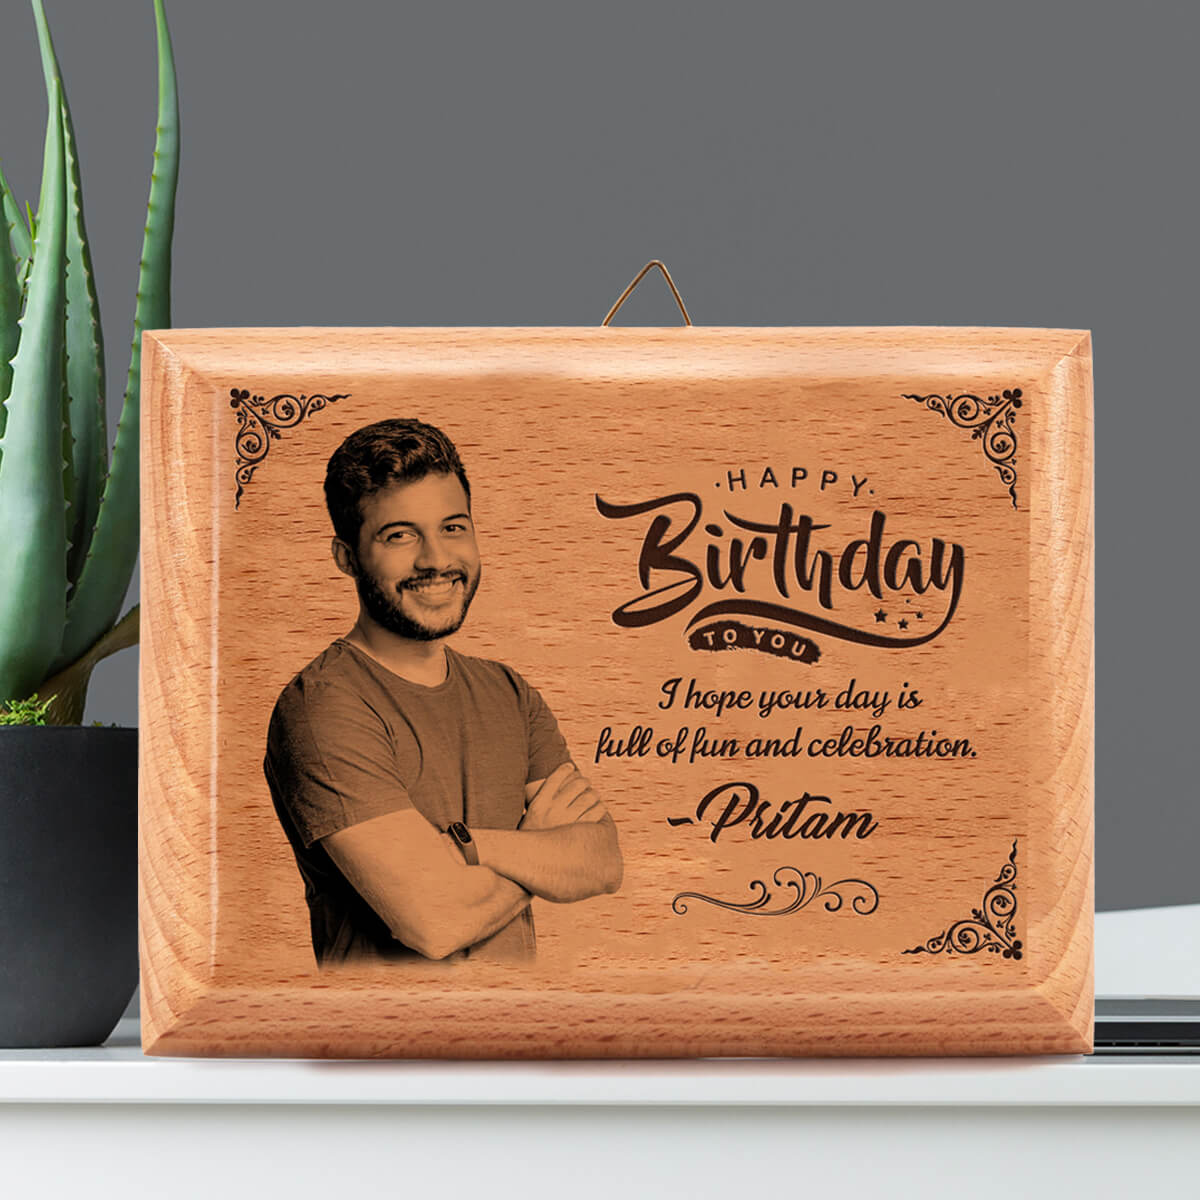 Personalized Laser Engraved Wooden Photo Frame gift